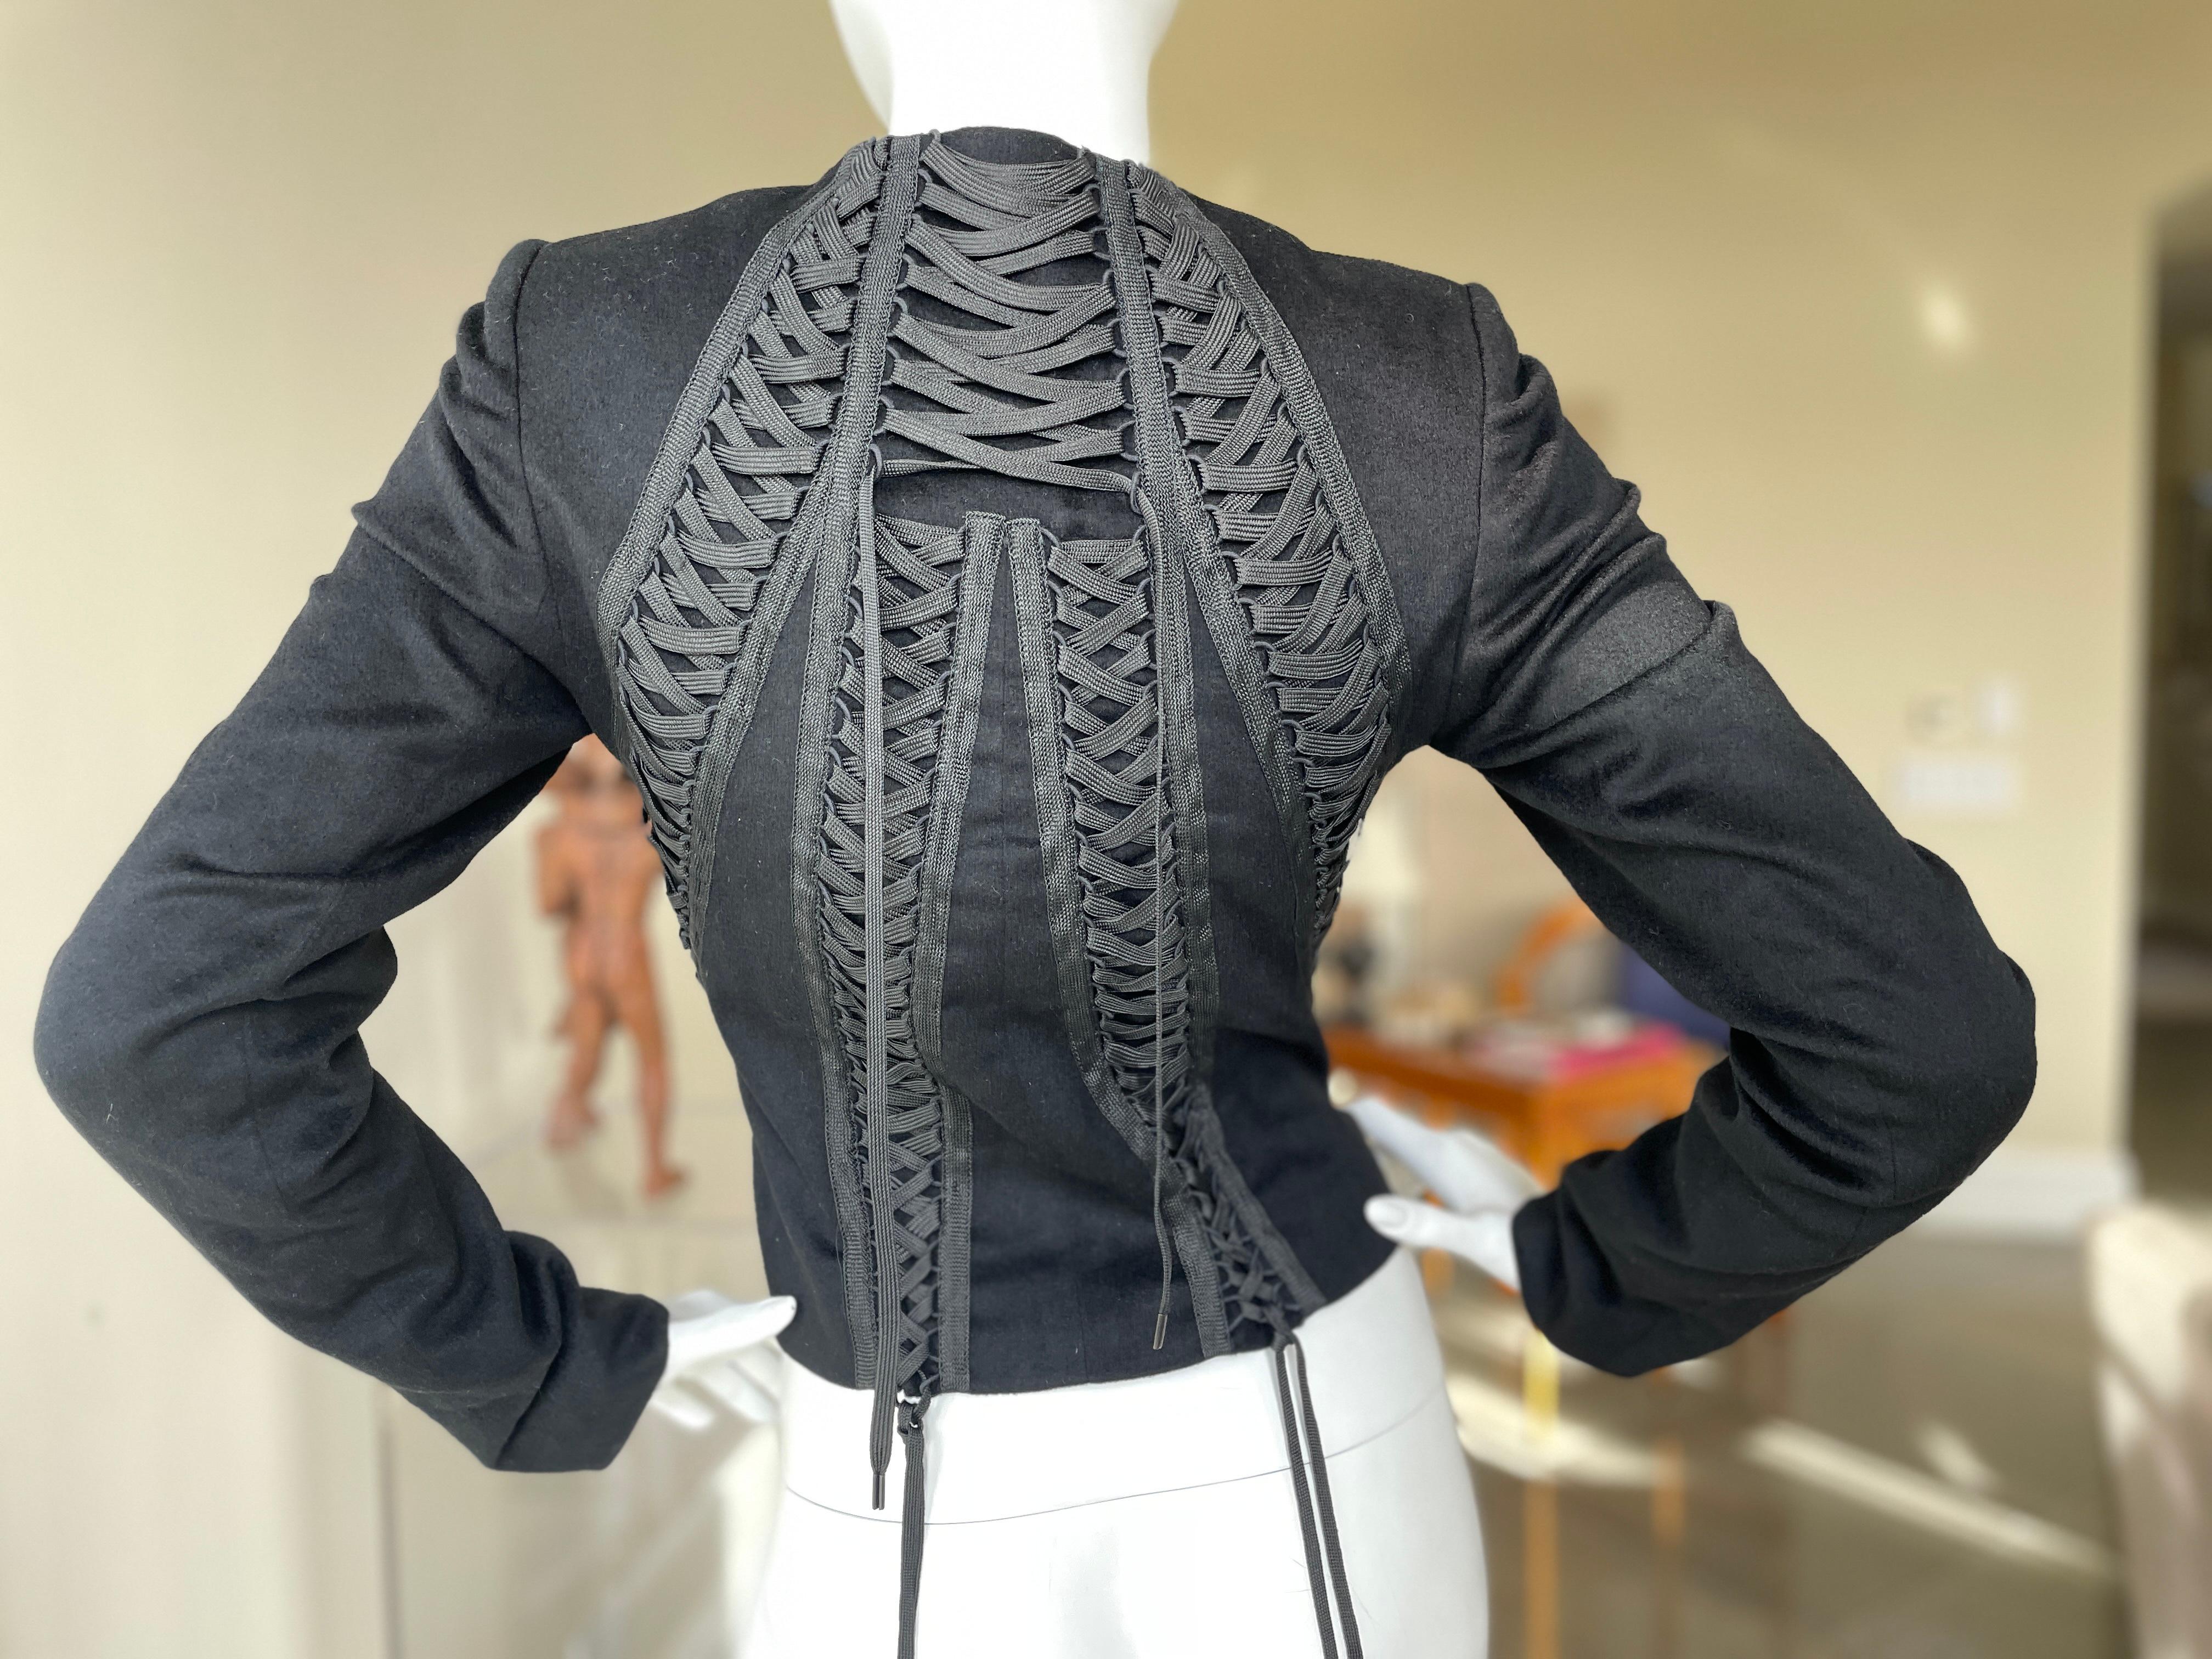 Christian Dior Autumn 2002 Black Cashmere Corset Laced Jacket by John Galliano In Excellent Condition For Sale In Cloverdale, CA